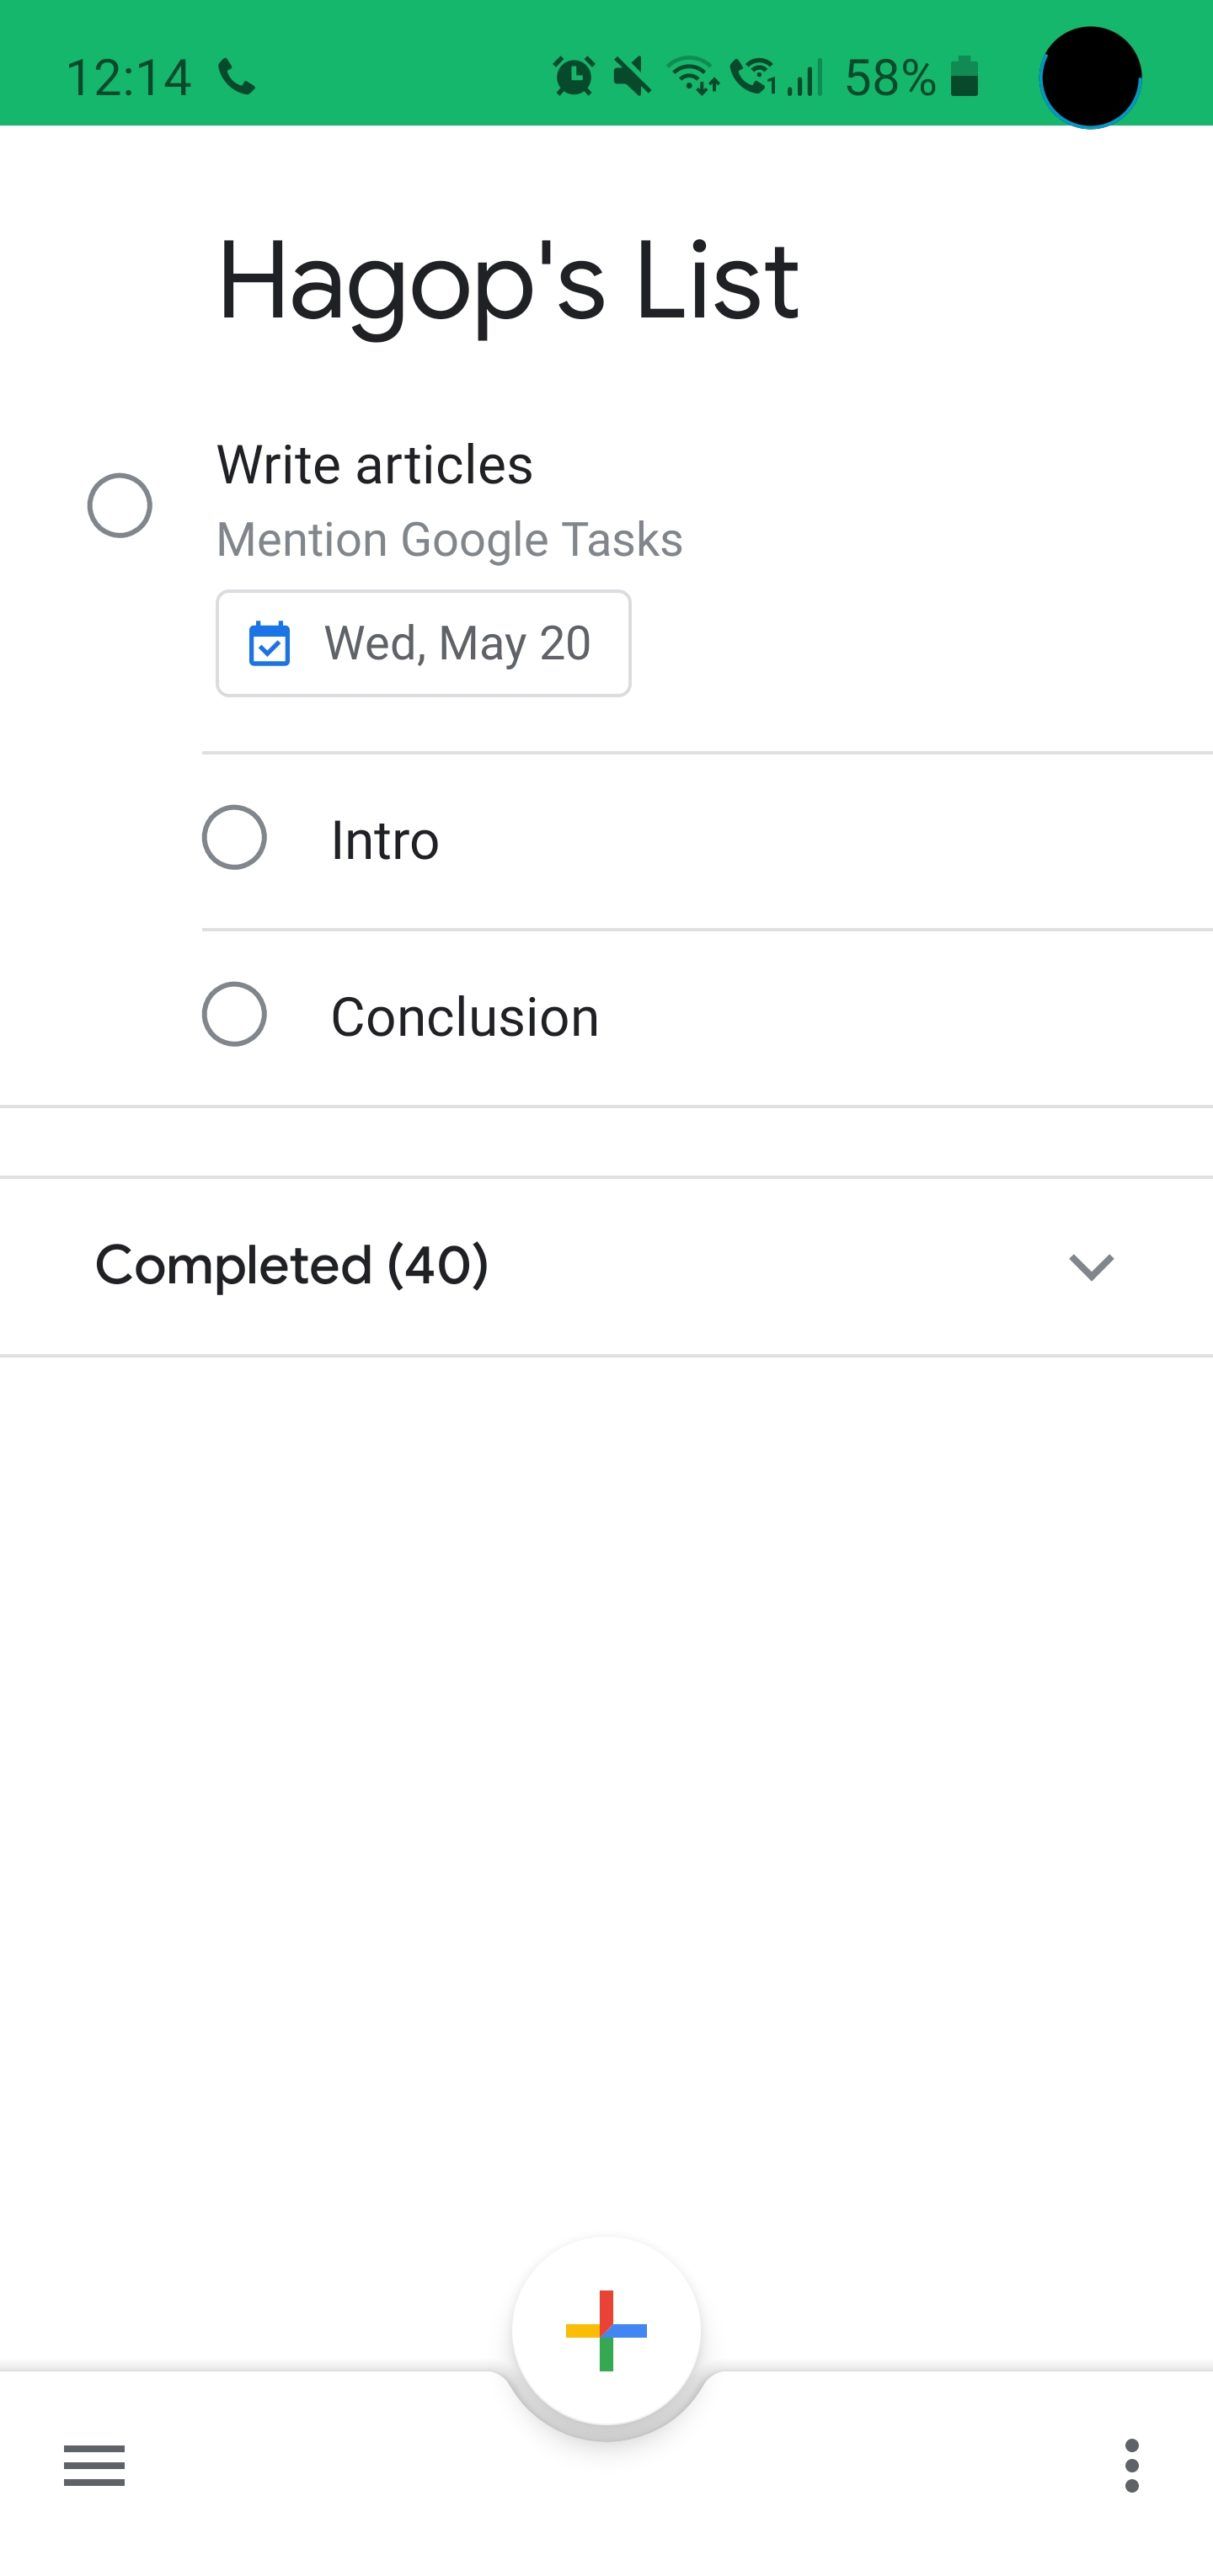 Showing an example list with completed tasks in the Google Tasks app